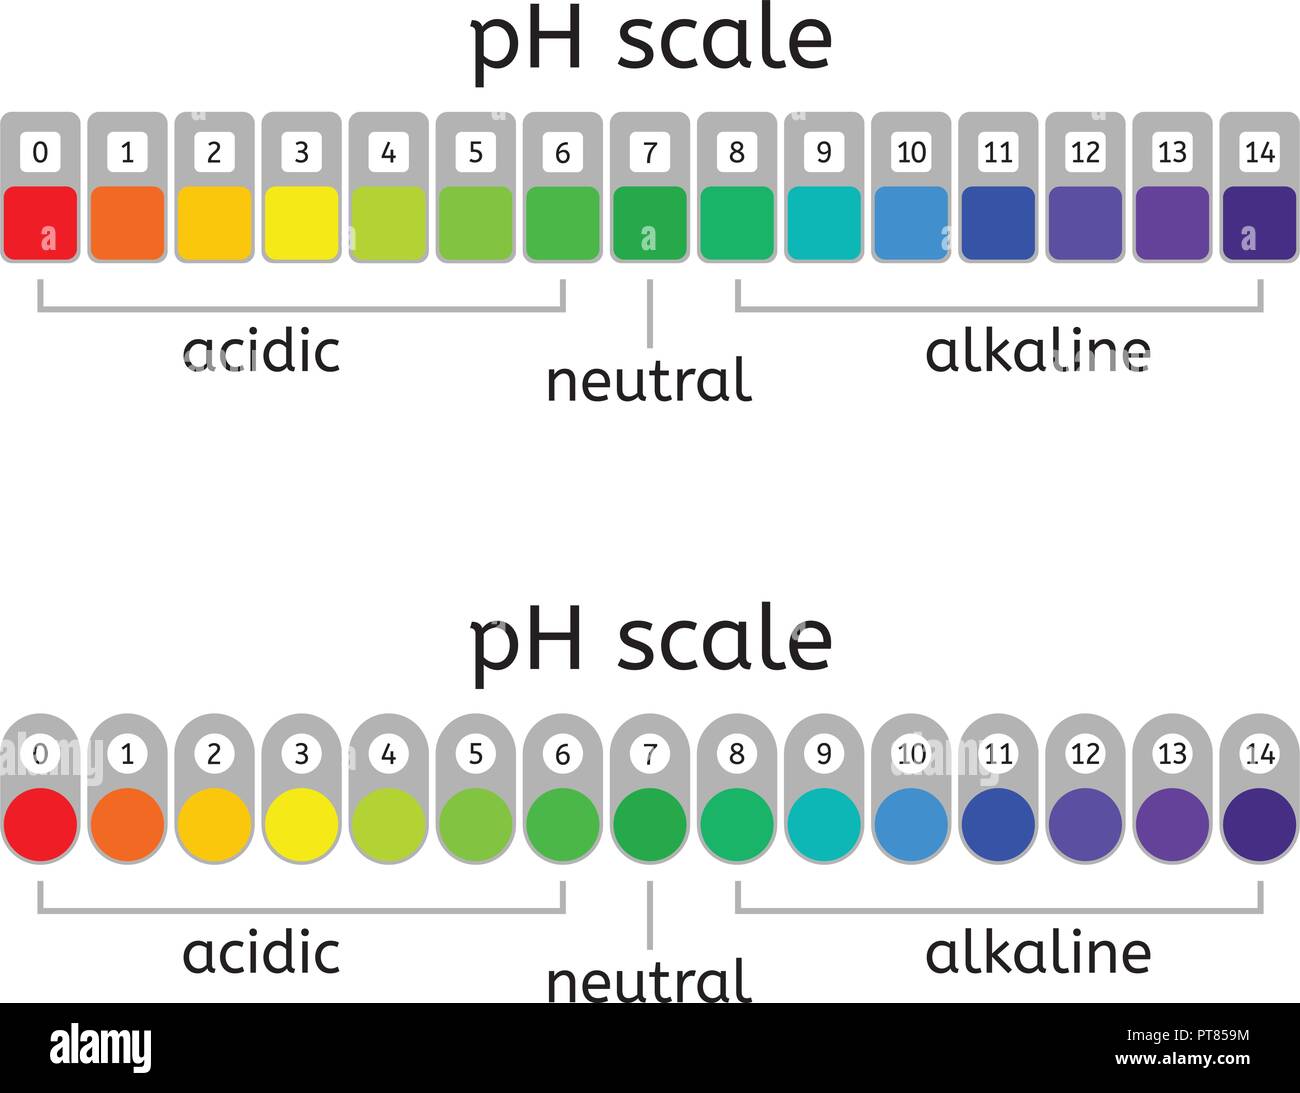 vector-ph-scale-of-acidic-neutral-and-alkaline-value-chart-for-acid-and-alkaline-solutions-ph